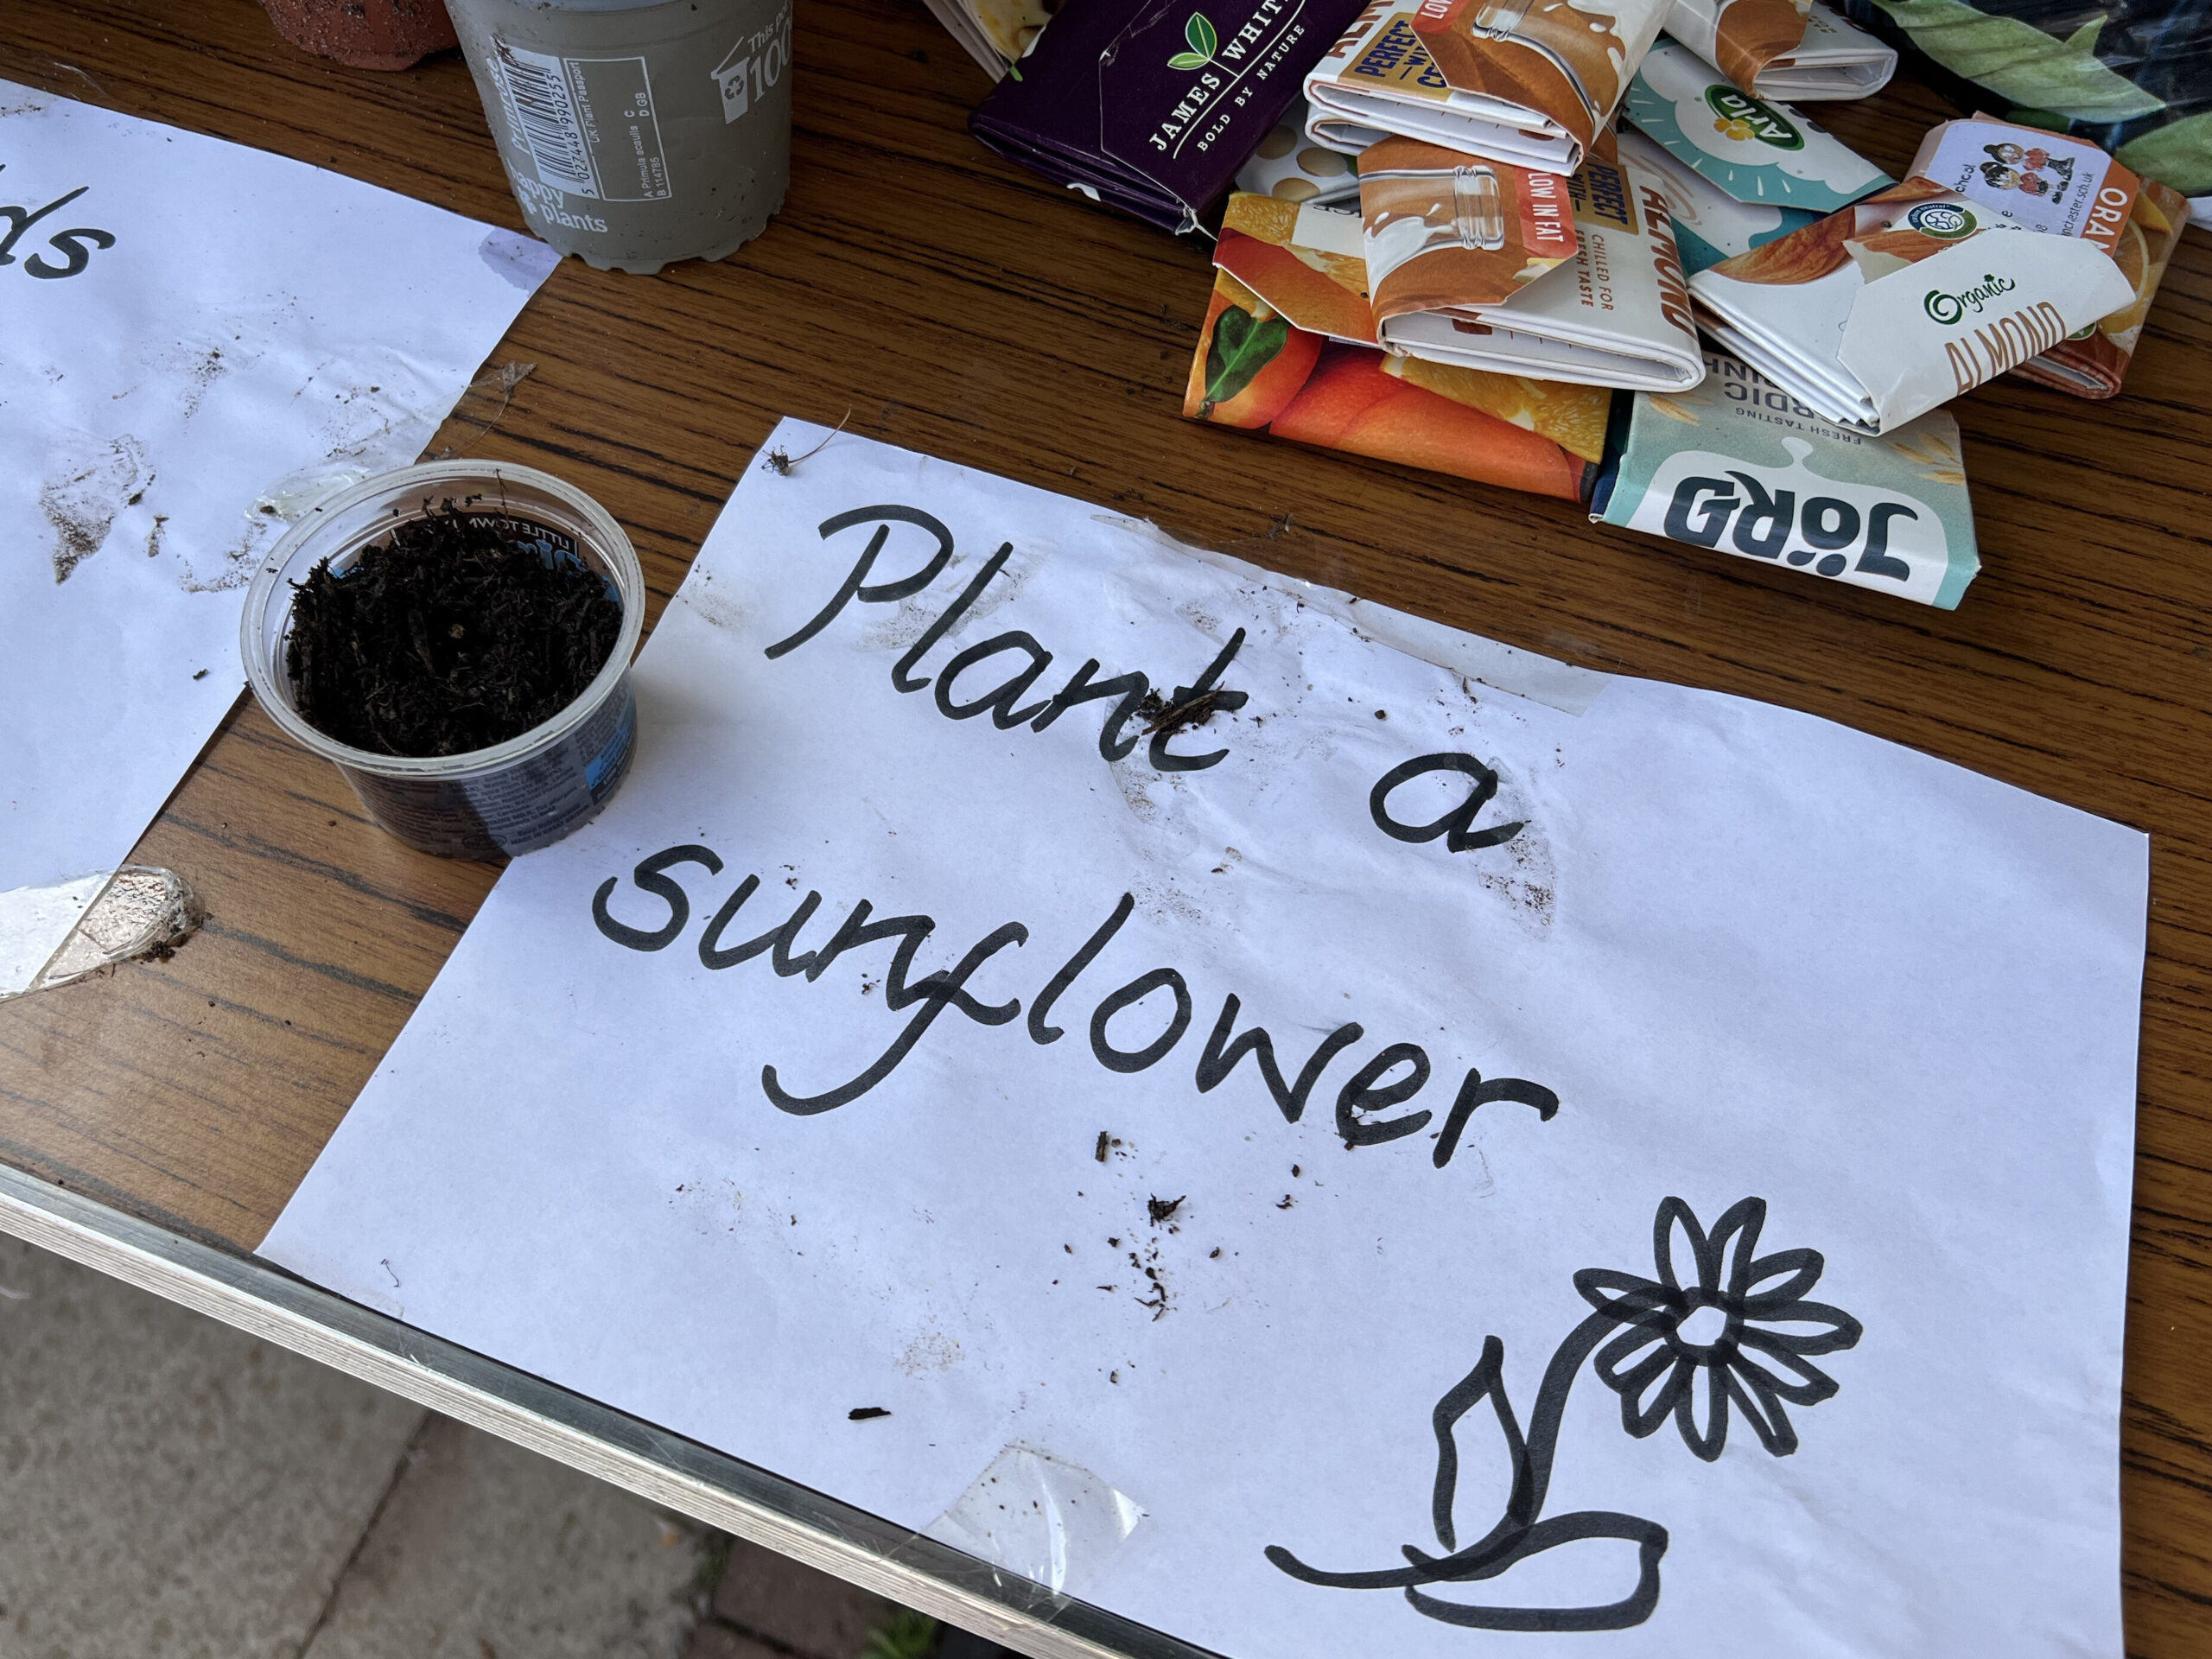 Sign reads "Plant a sunflower" with a pot of soil and seeds.